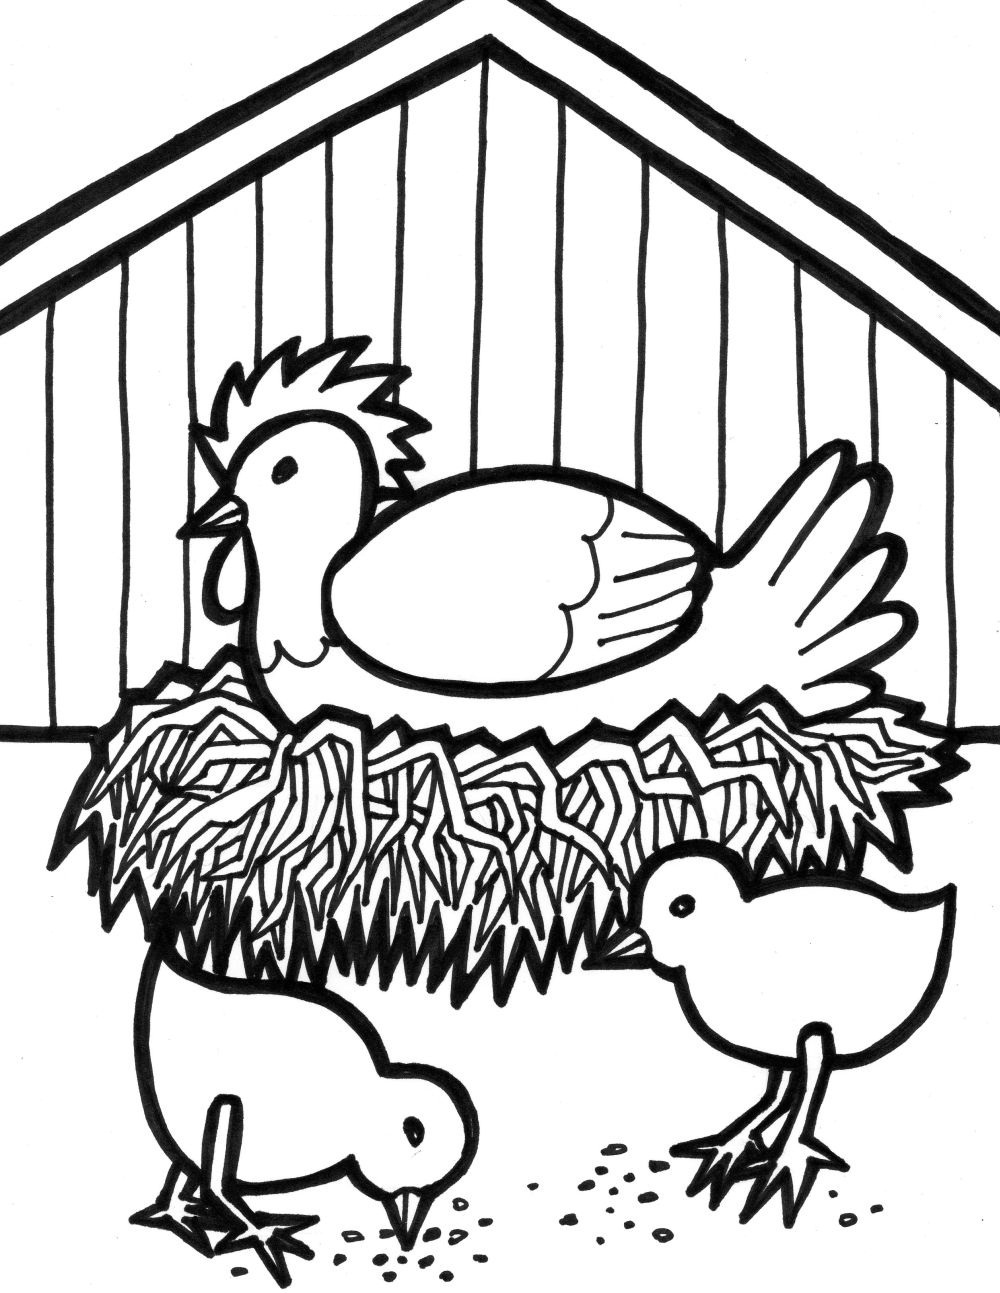 DIY Farm Crafts and Activities with 33 Farm Coloring